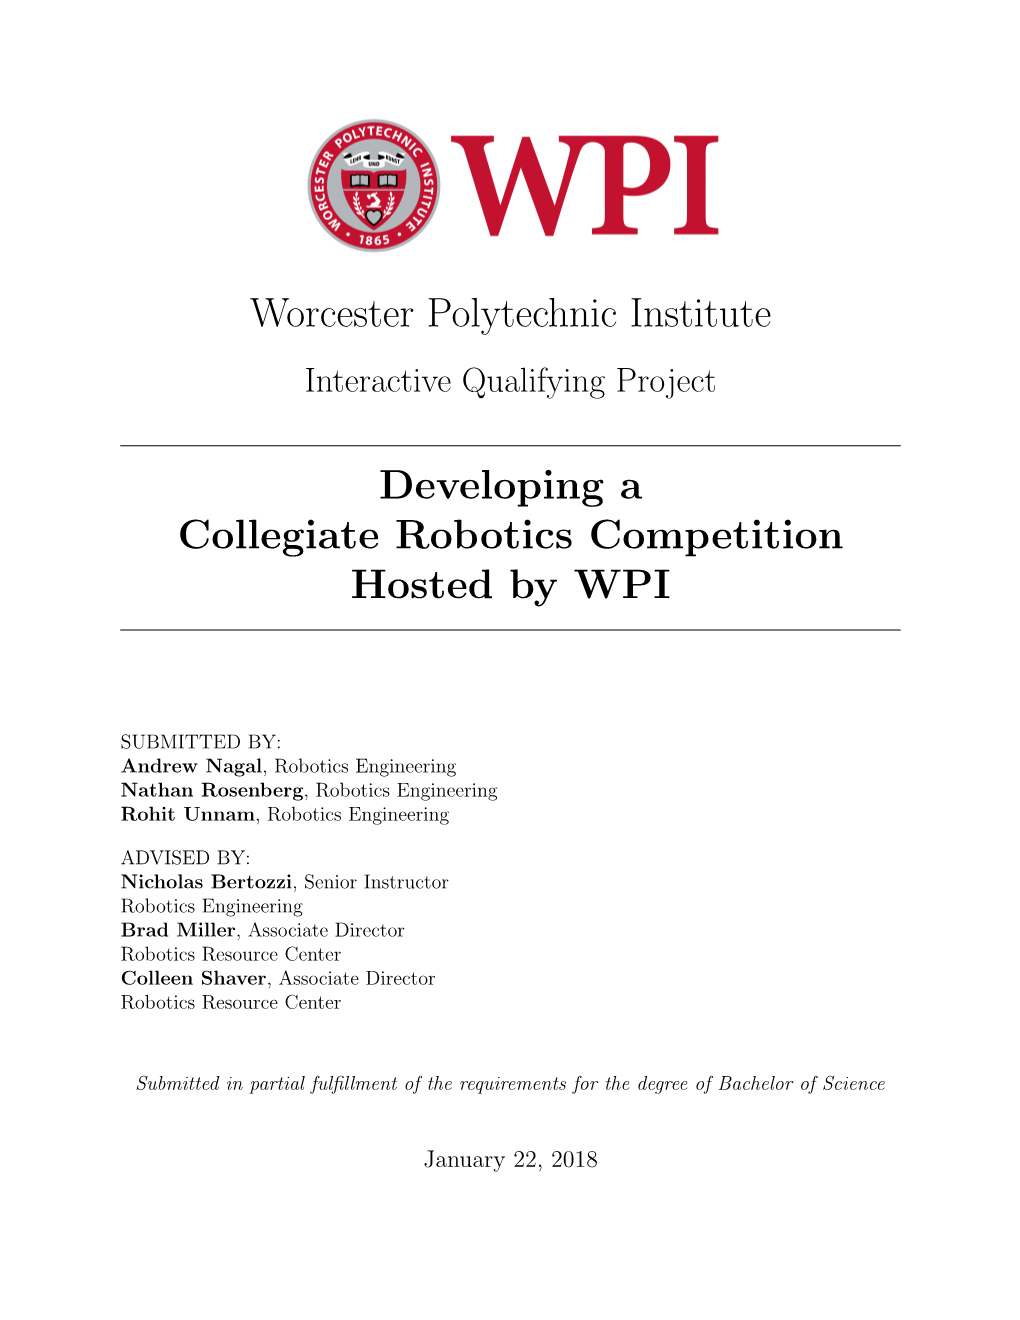 Worcester Polytechnic Institute Developing a Collegiate Robotics Competition Hosted By